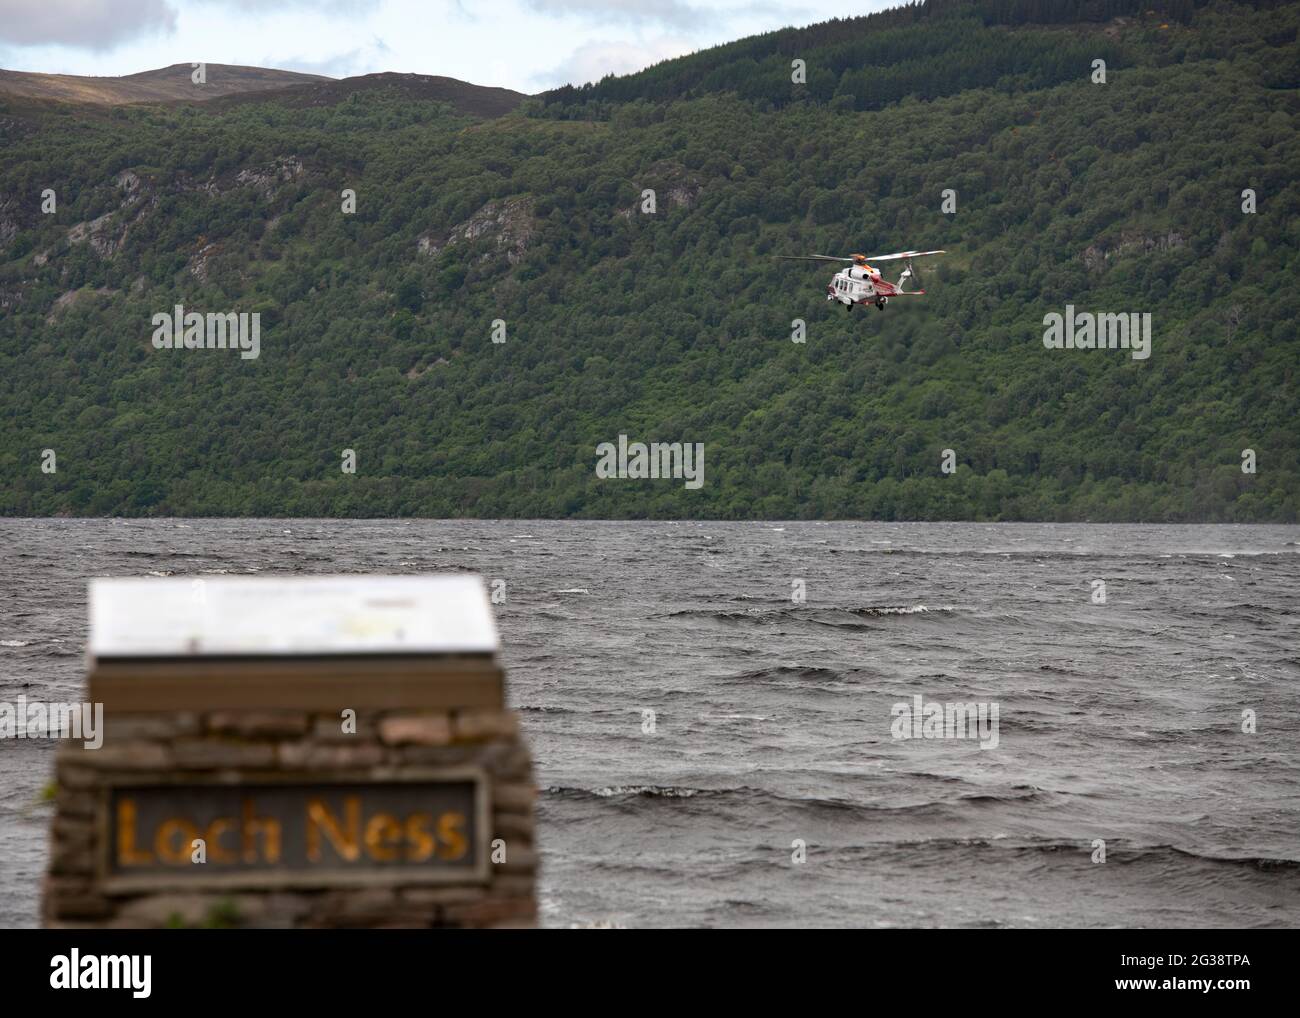 Dores, Loch Ness, Scotland, UK. 14th June, 2021. Pictured: Coast Guard helicopter seen hovering above the deep and murky waters of Loch Ness where there have been many Loch Ness Monster sightings from Dores beach. The helicopter is seen lowering personnel into the loch to perform a water rescue from the airborne platform whilst hovering less than a hundred feet above the water surface. Credit: Colin Fisher/Alamy Live News Stock Photo